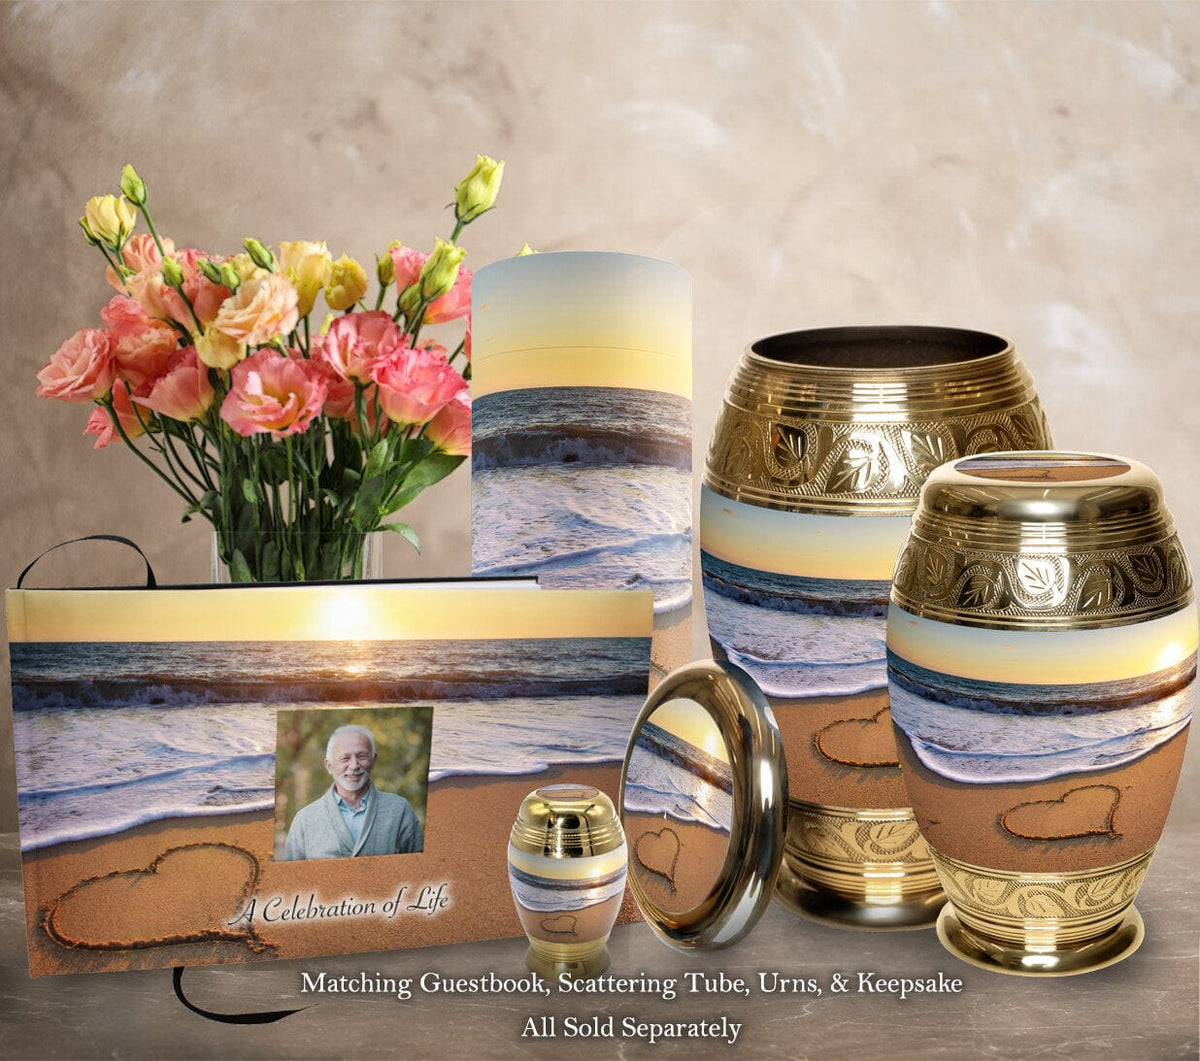 Commemorative Cremation Urns Home &amp; Garden Endless Summer Matching Themed &#39;Celebration of Life&#39; Guest Book for Funeral or Memorial Service